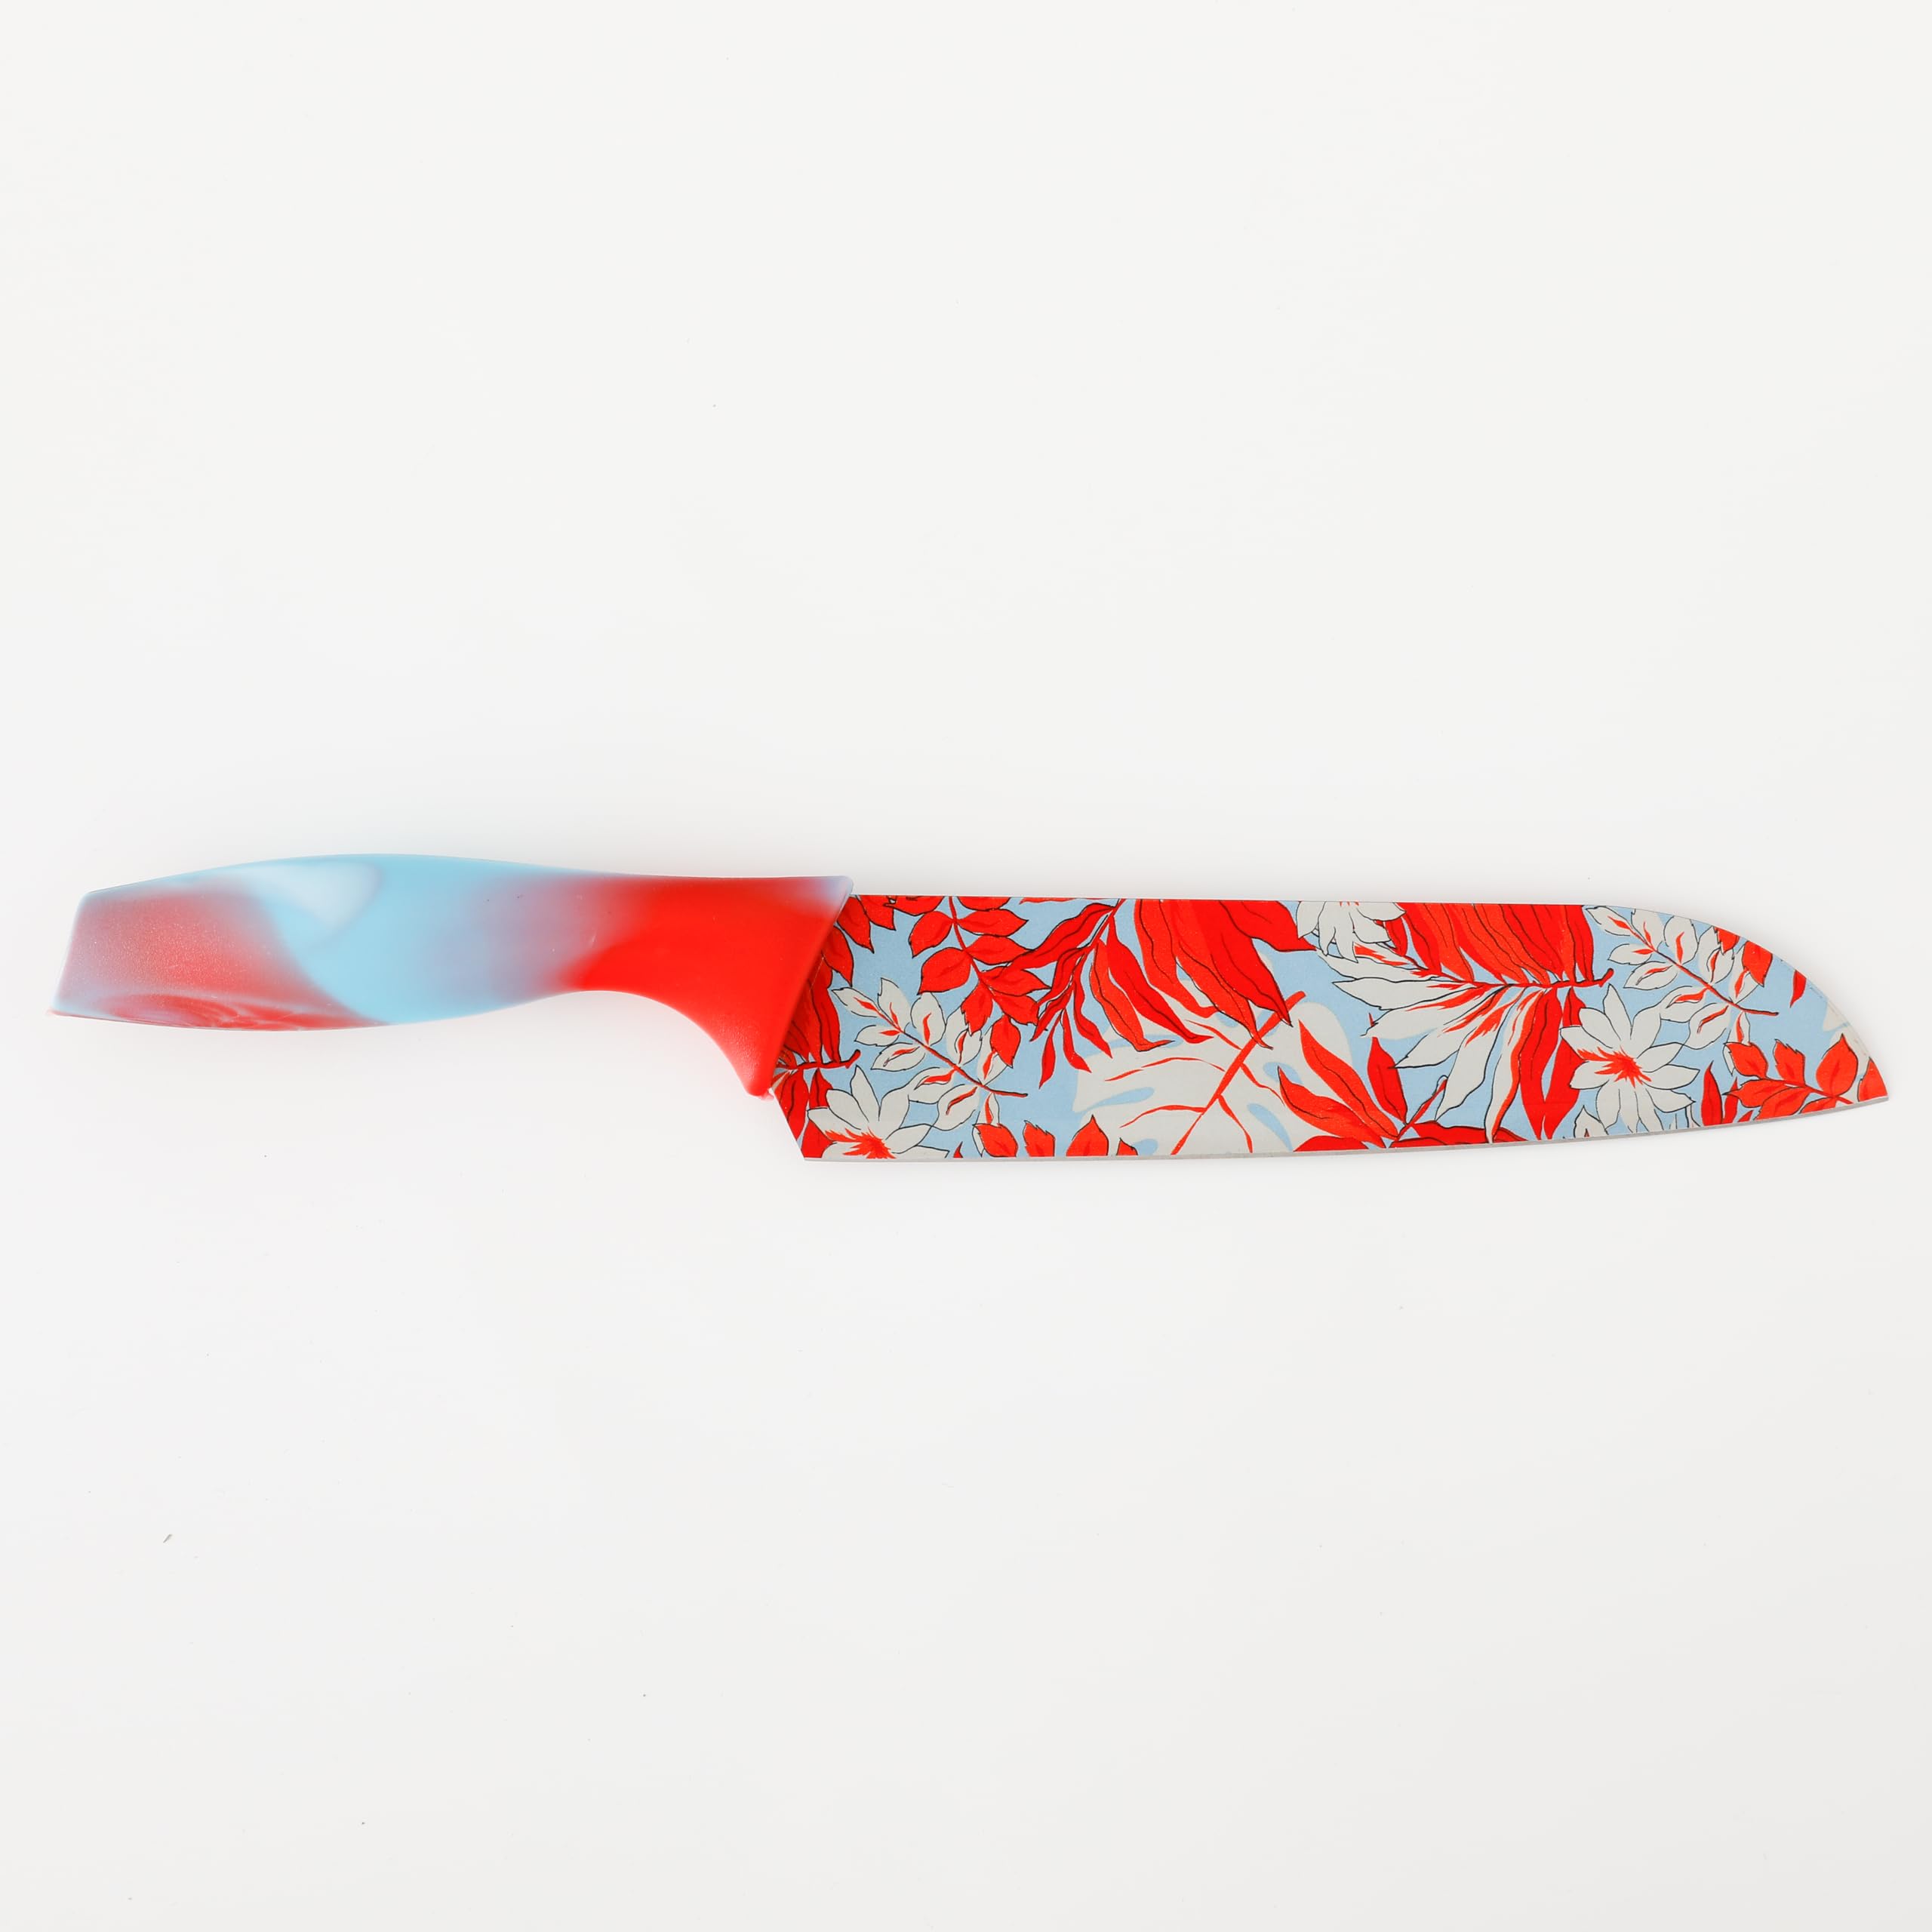 The Better Home Knife Kitchen Knife Chef Knife Color Printing Santoku Knife & Non-Slip Handle with Blade Cover,7 inch, Stainless Steel|Utility Knife. (Red Set of 5)